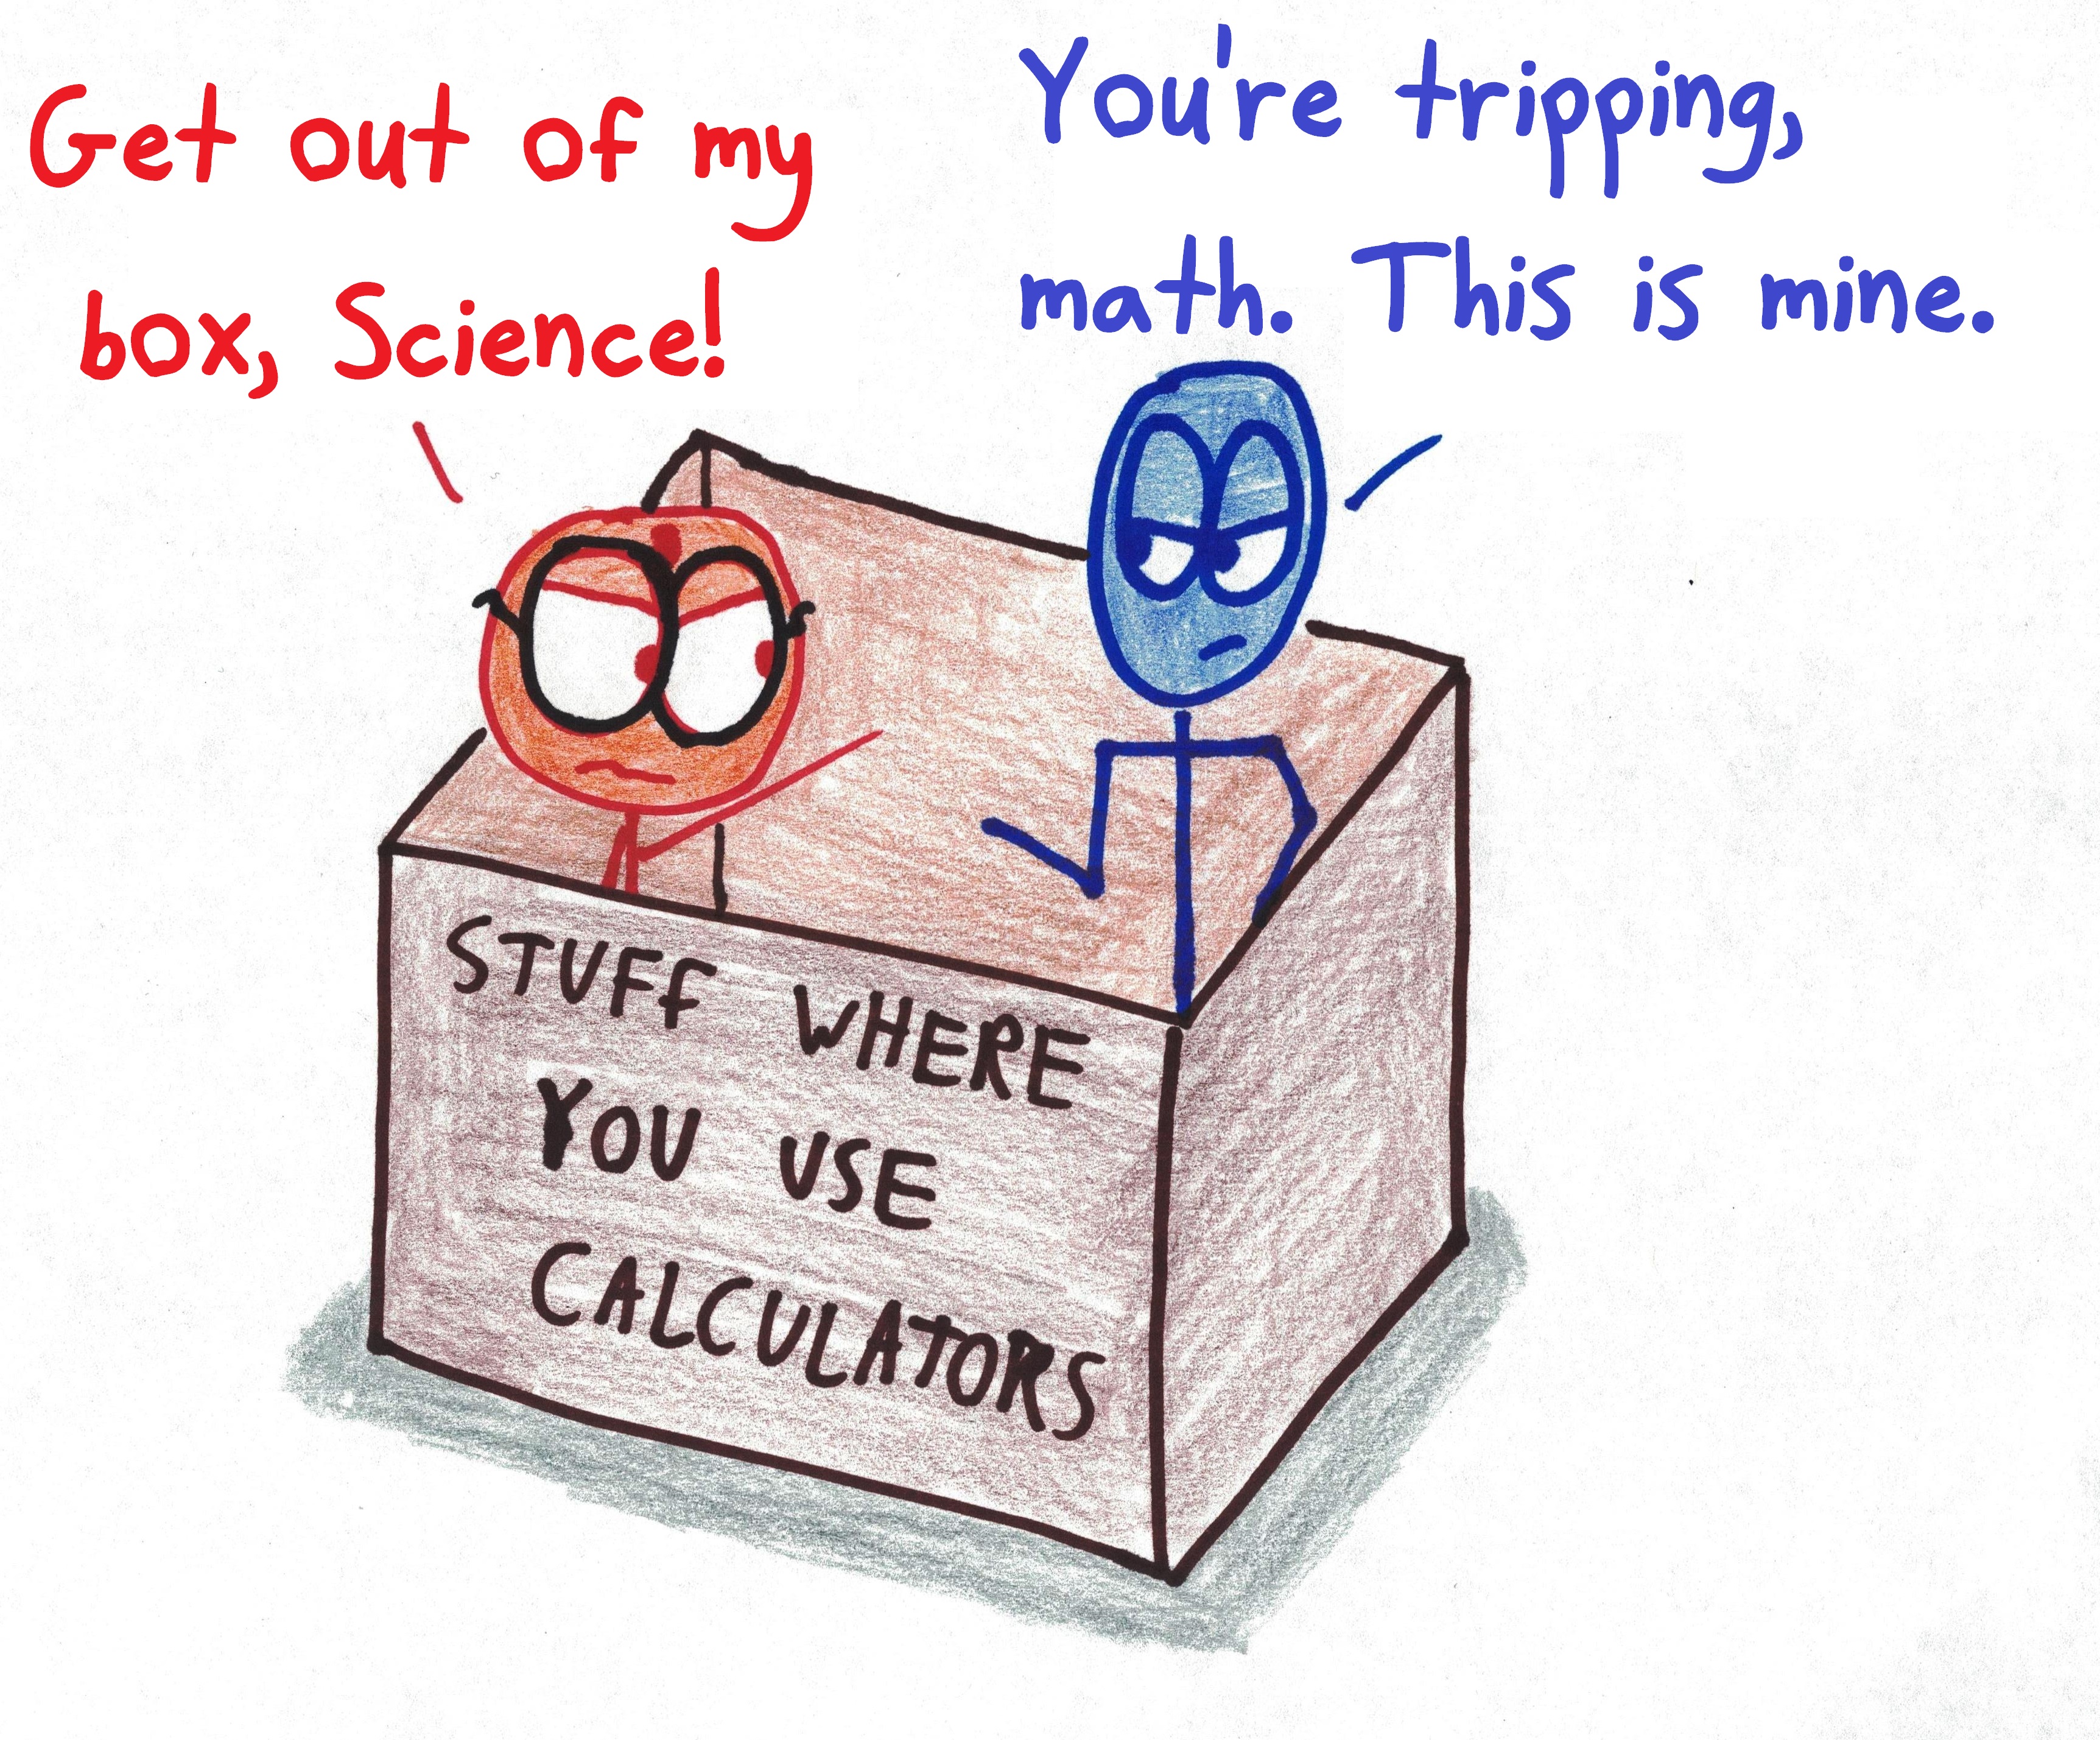 "Stuff where you use calculators- 'Get out of my box, science.' 'You're tripping, math. This is mine.'"